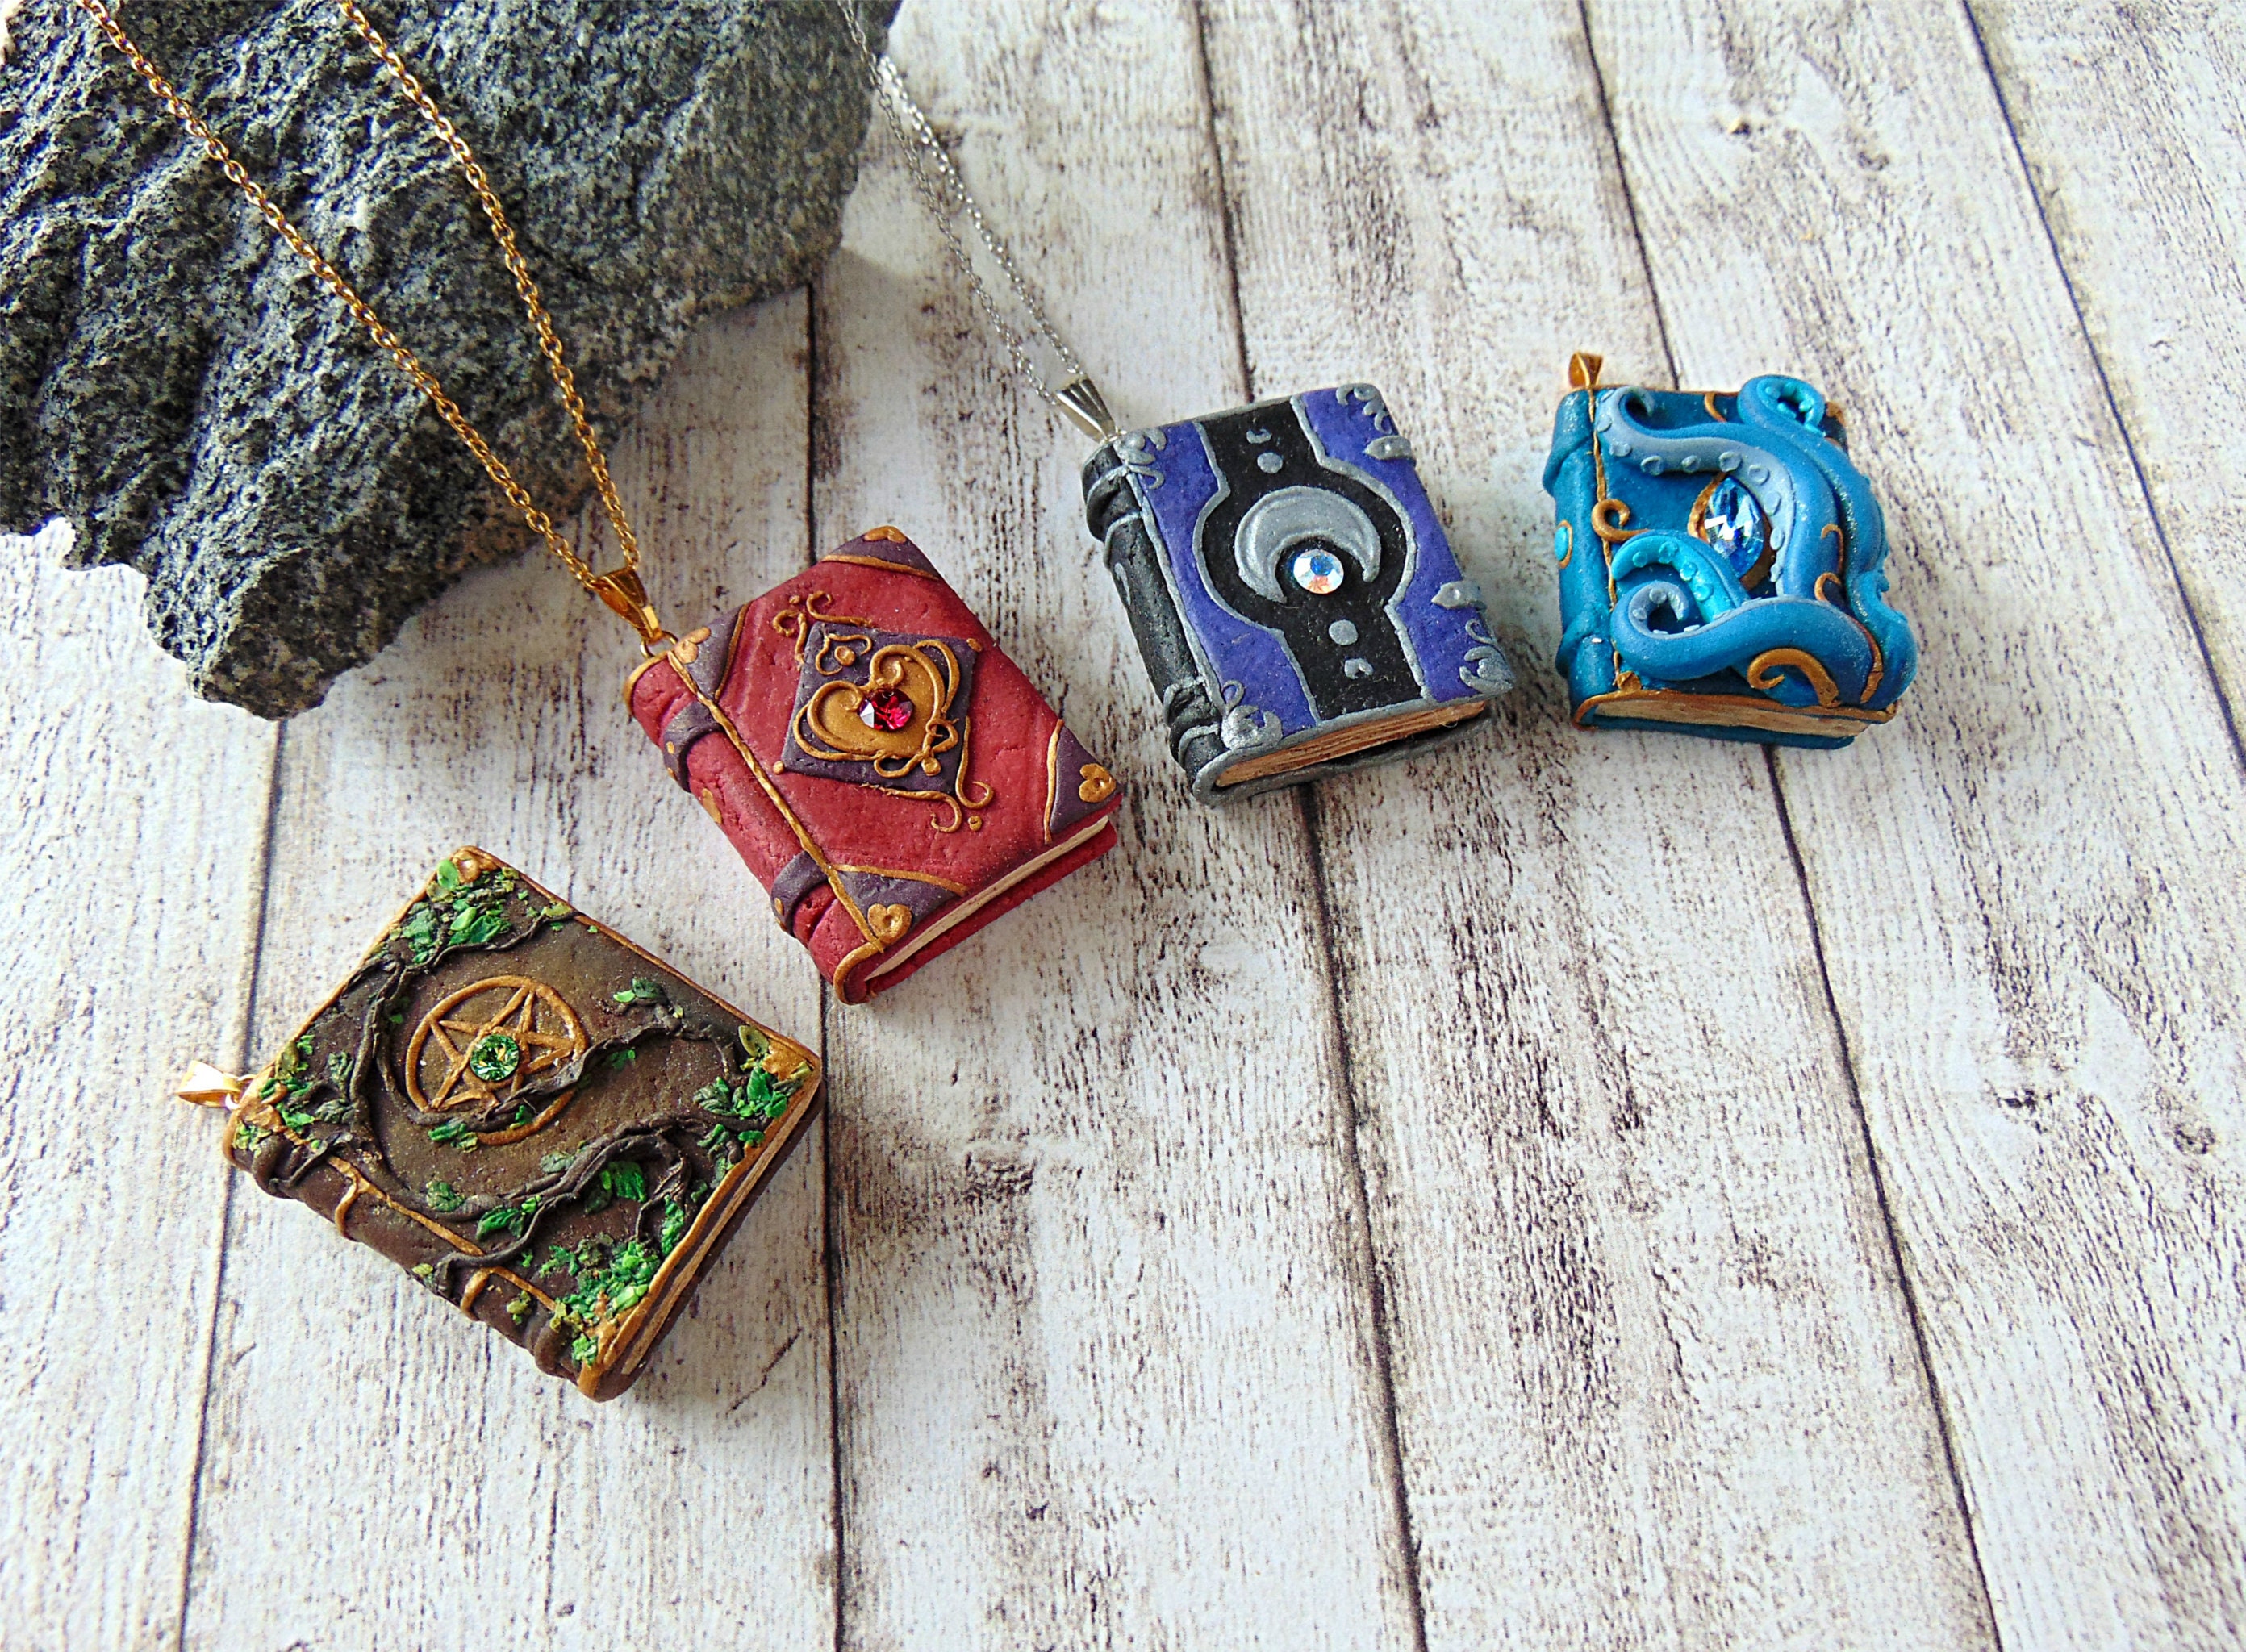 Antique Book Charms from Polymer clay by WindySunset on DeviantArt